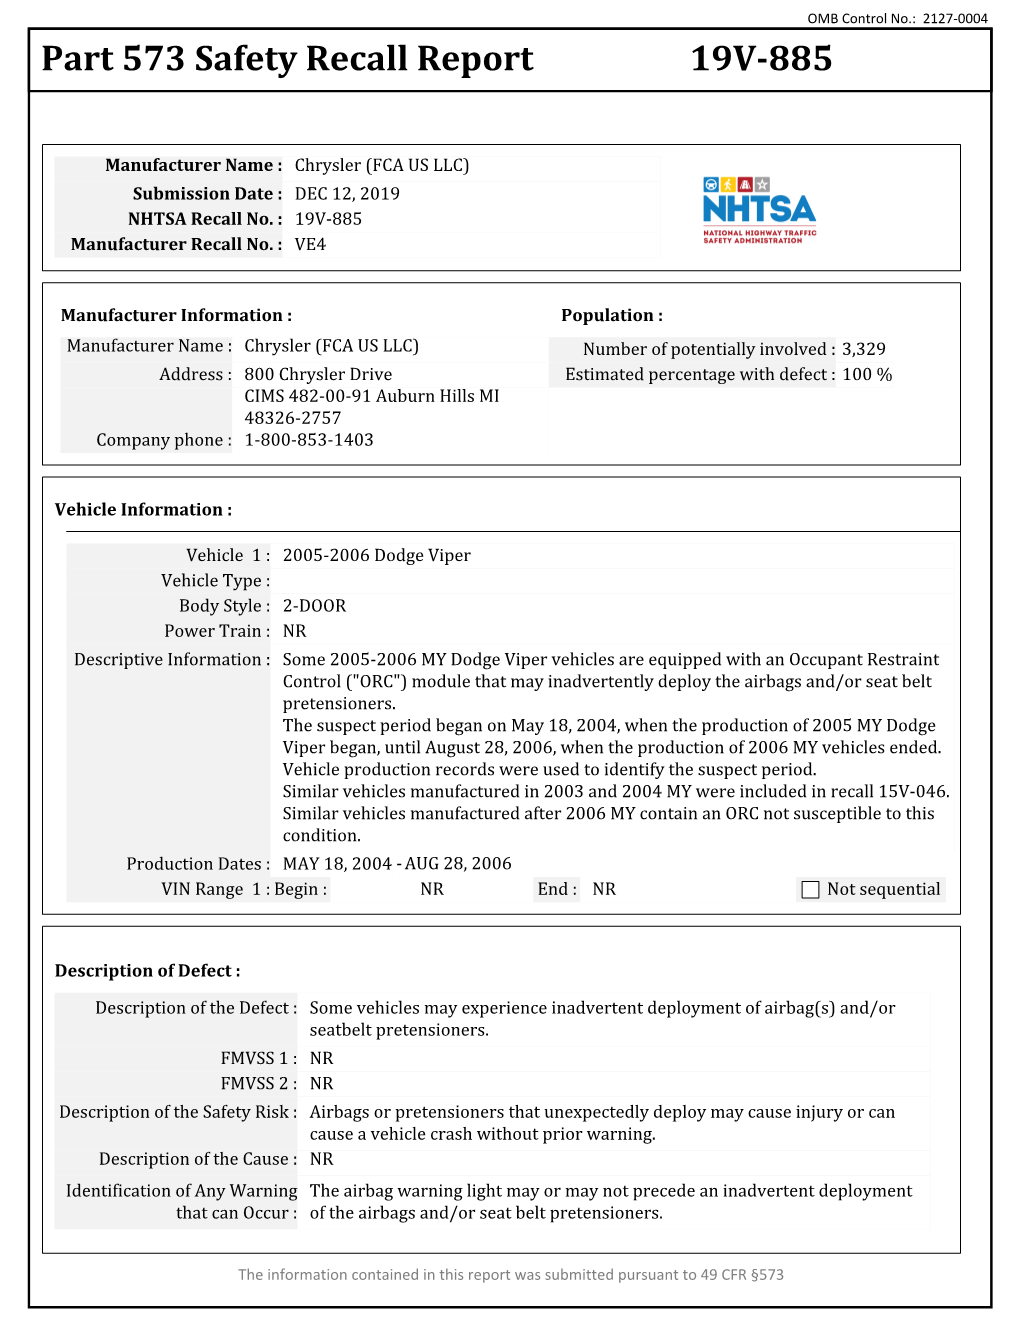 Part 573 Safety Recall Report 19V-885